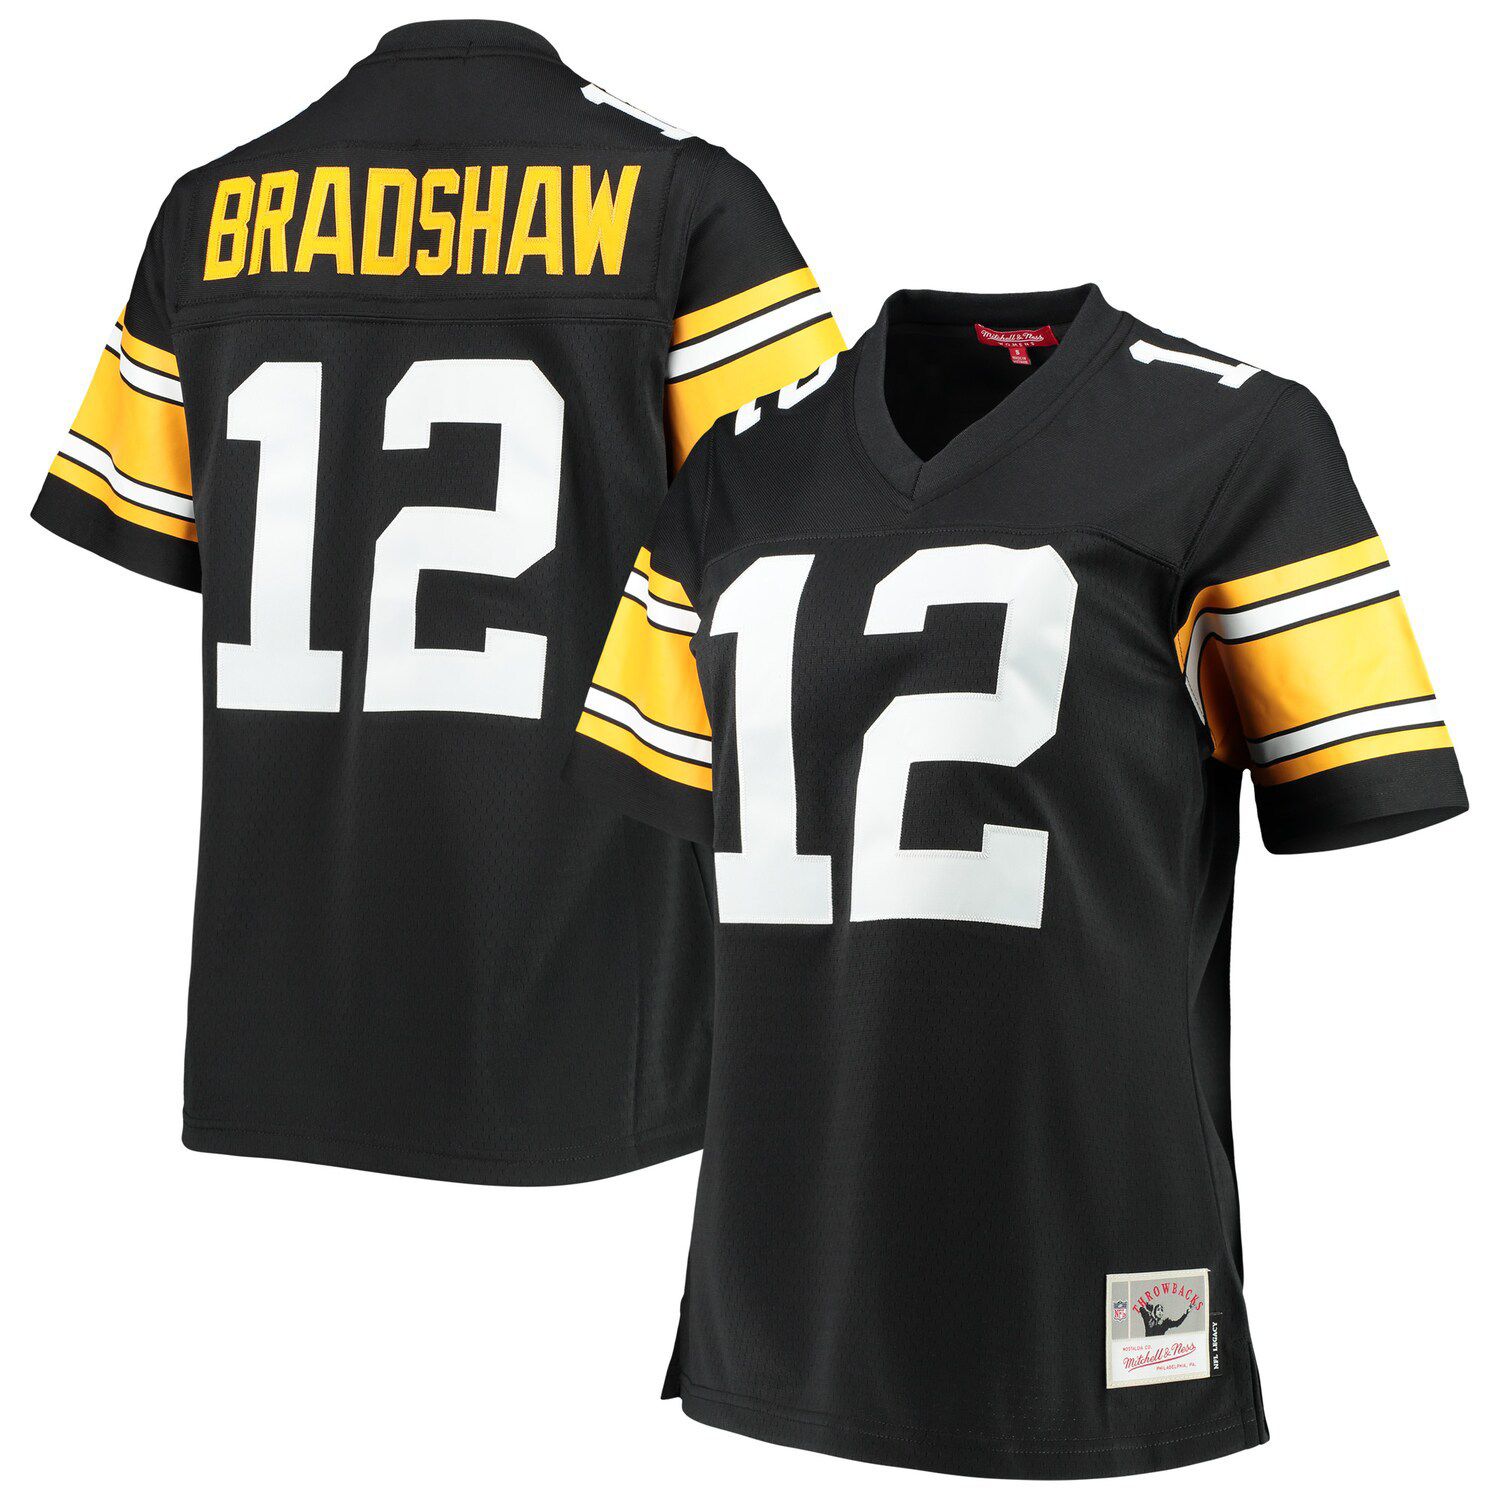 Terry Bradshaw 1975 Authentic Jersey Pittsburgh Steelers Mitchell & Ness  Nostalgia Co.